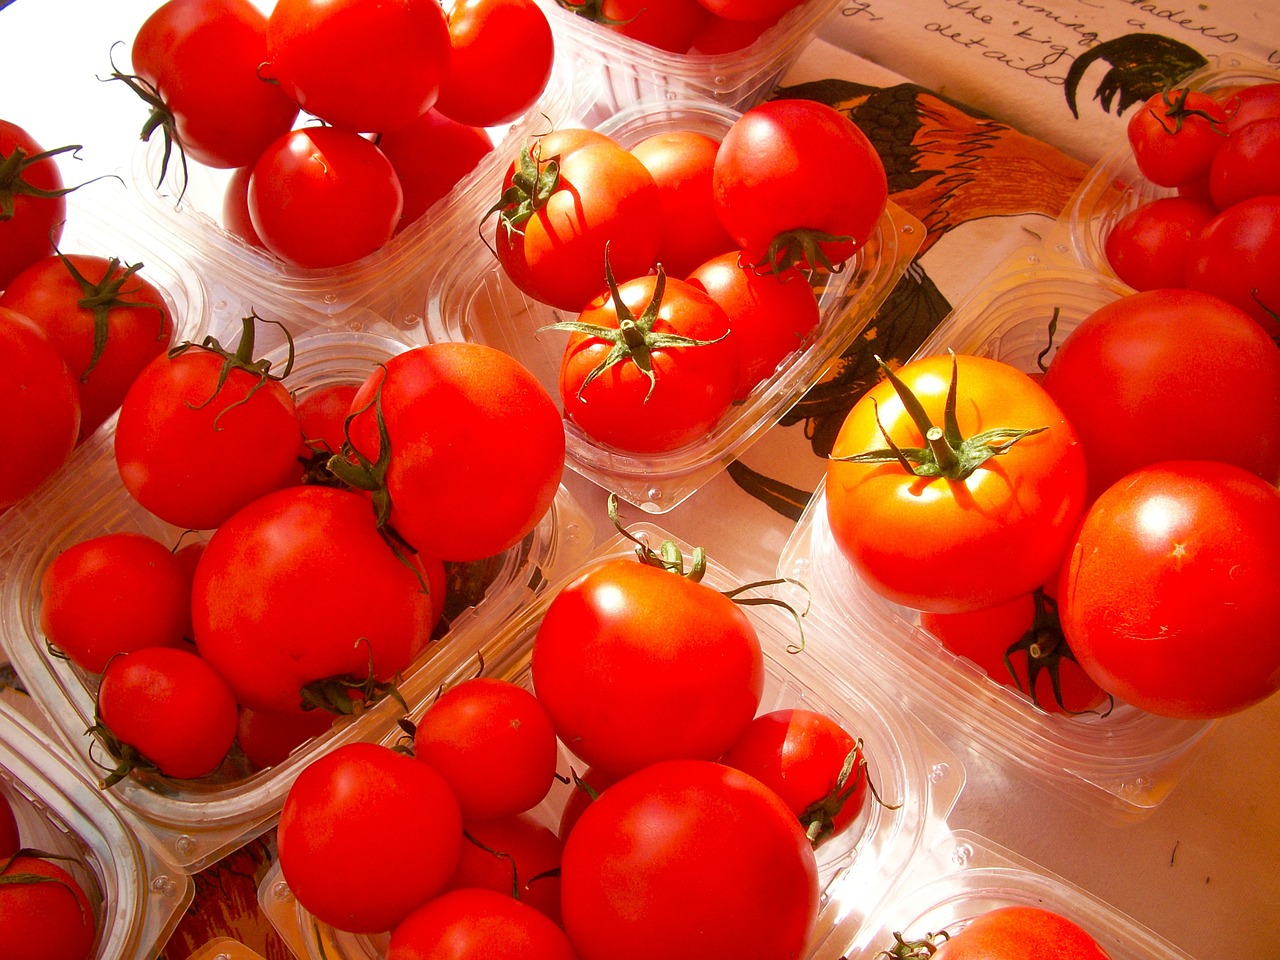 tomatoes vegetables healthy free photo